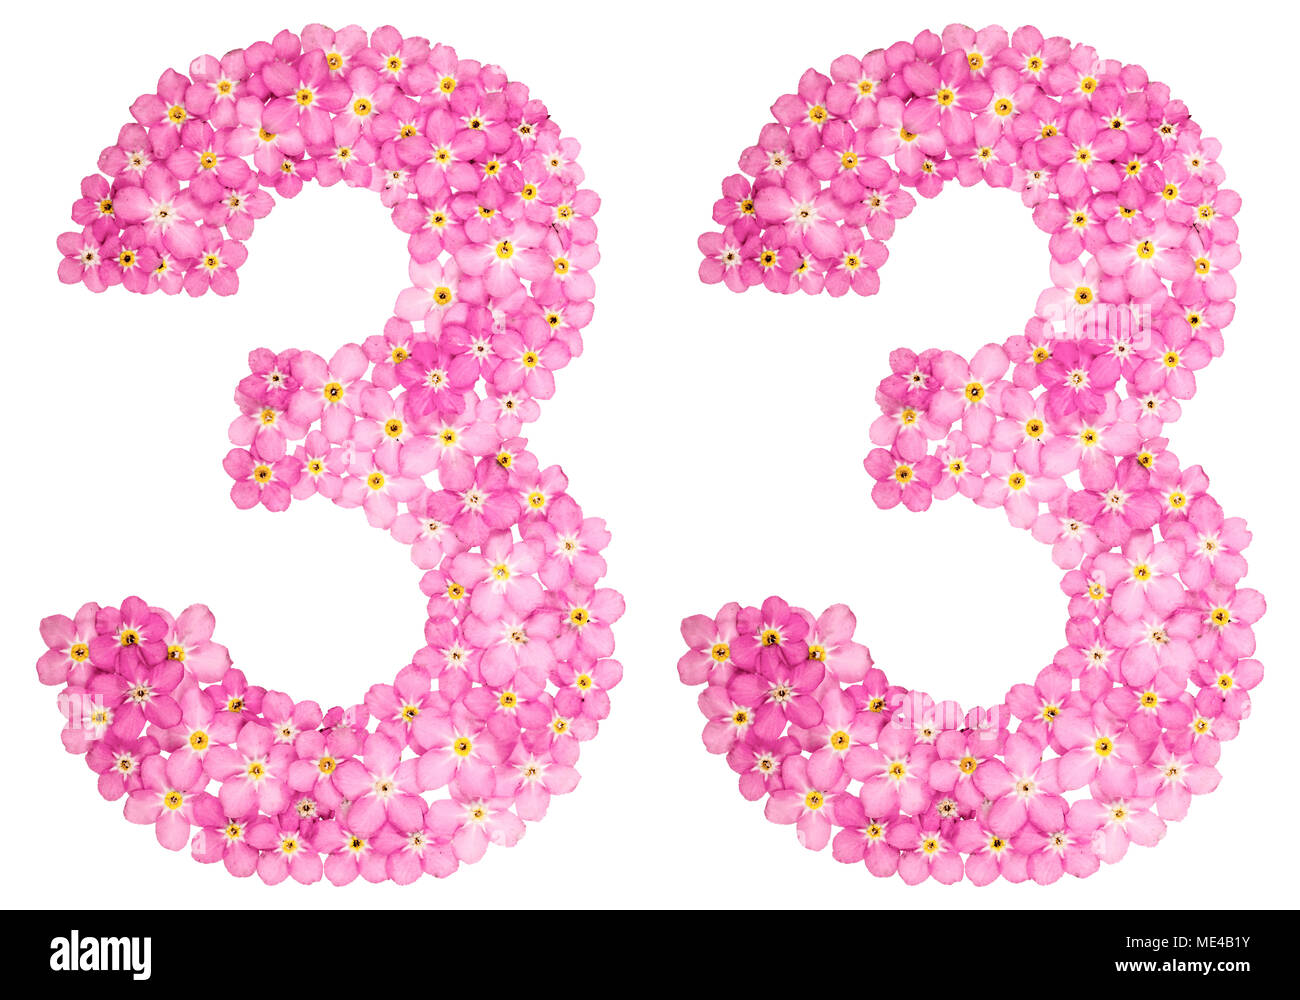 Arabic numeral 33, thirty three, from pink forget-me-not flowers